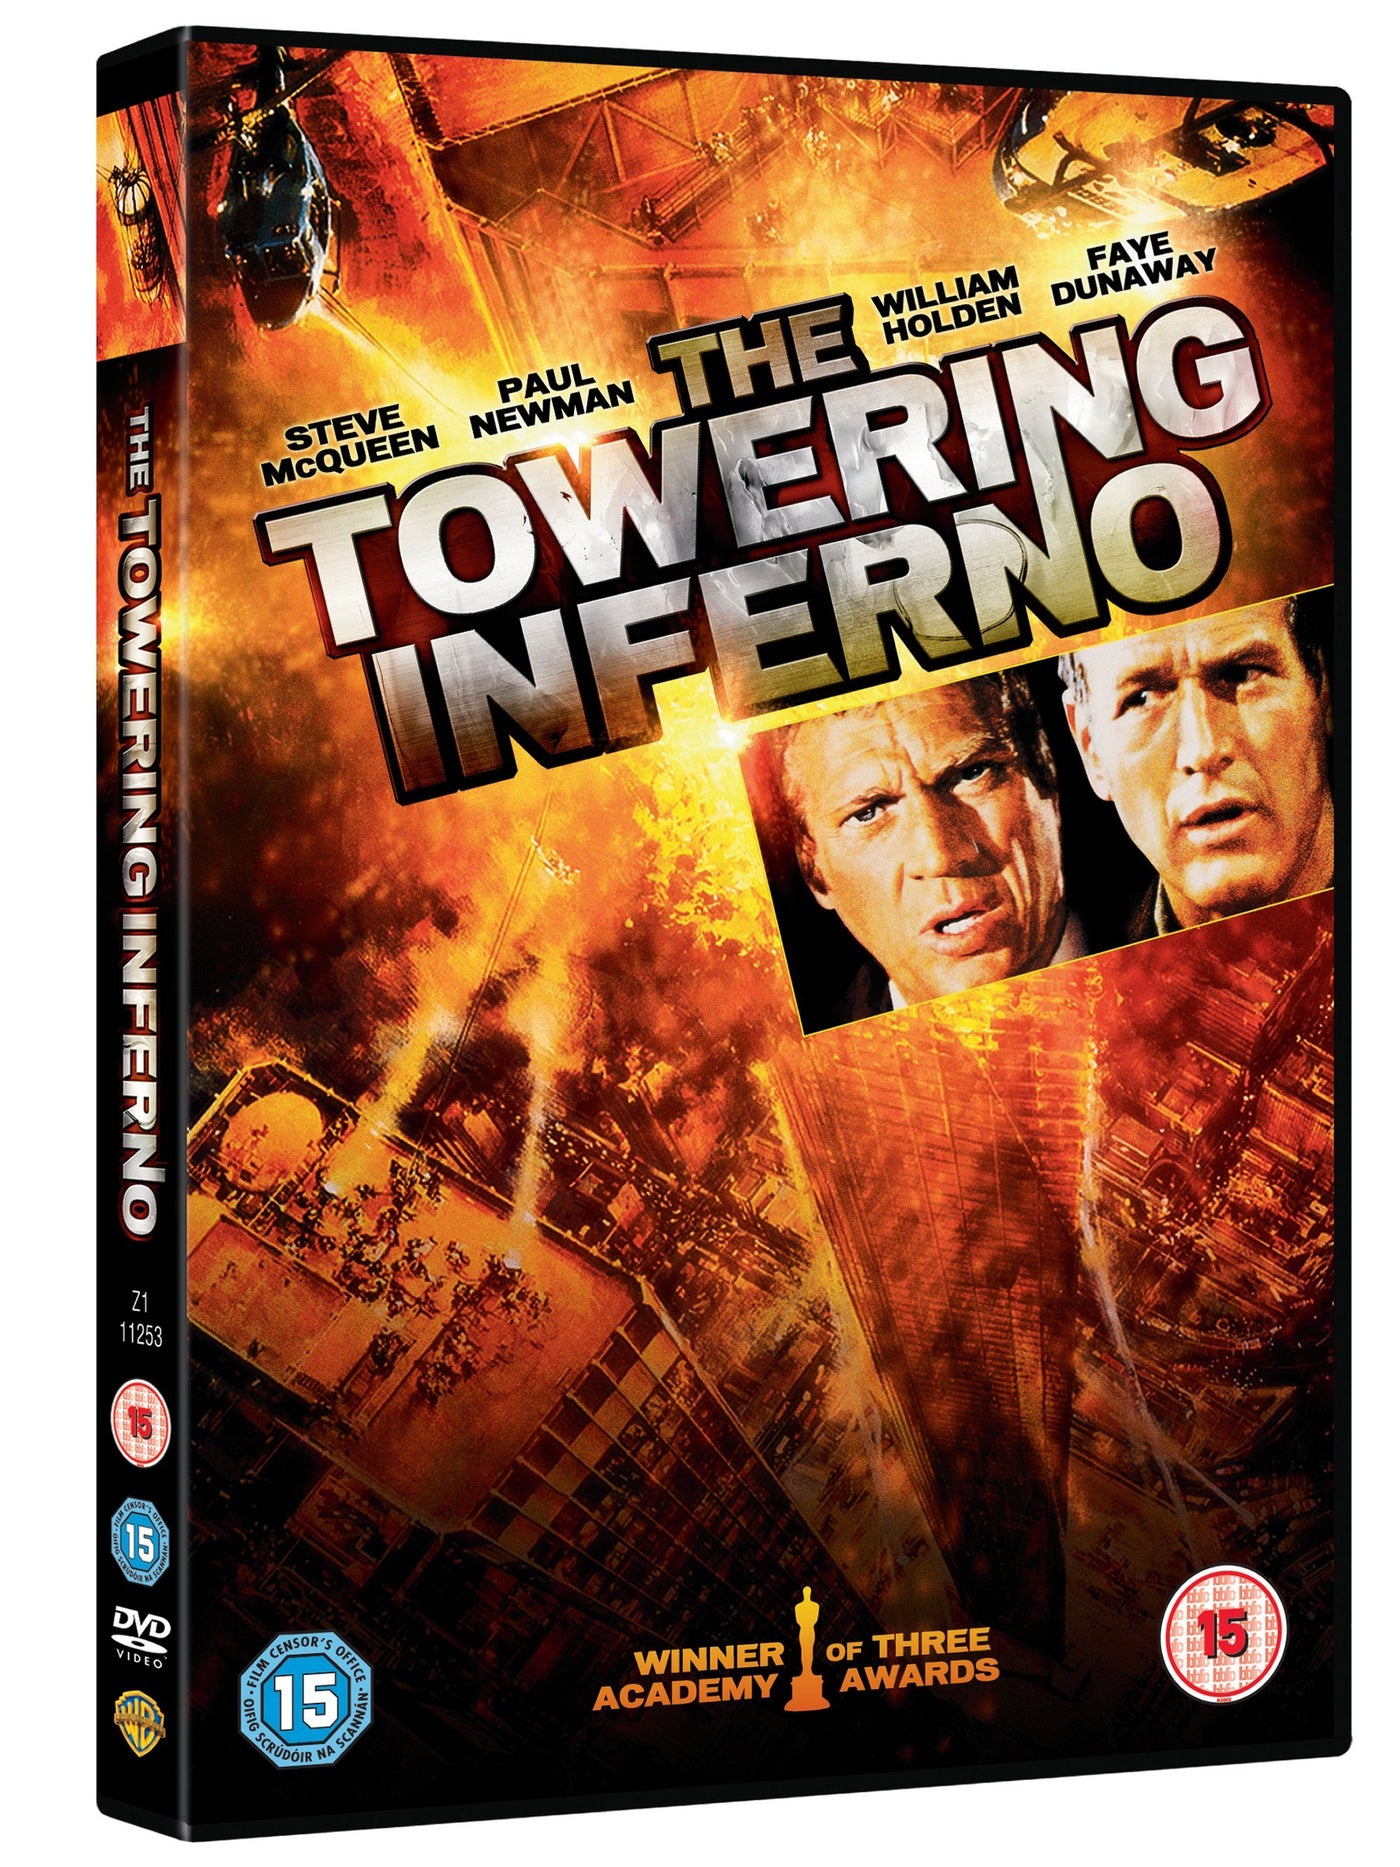 The Towering Inferno [1975] [1974] (DVD)